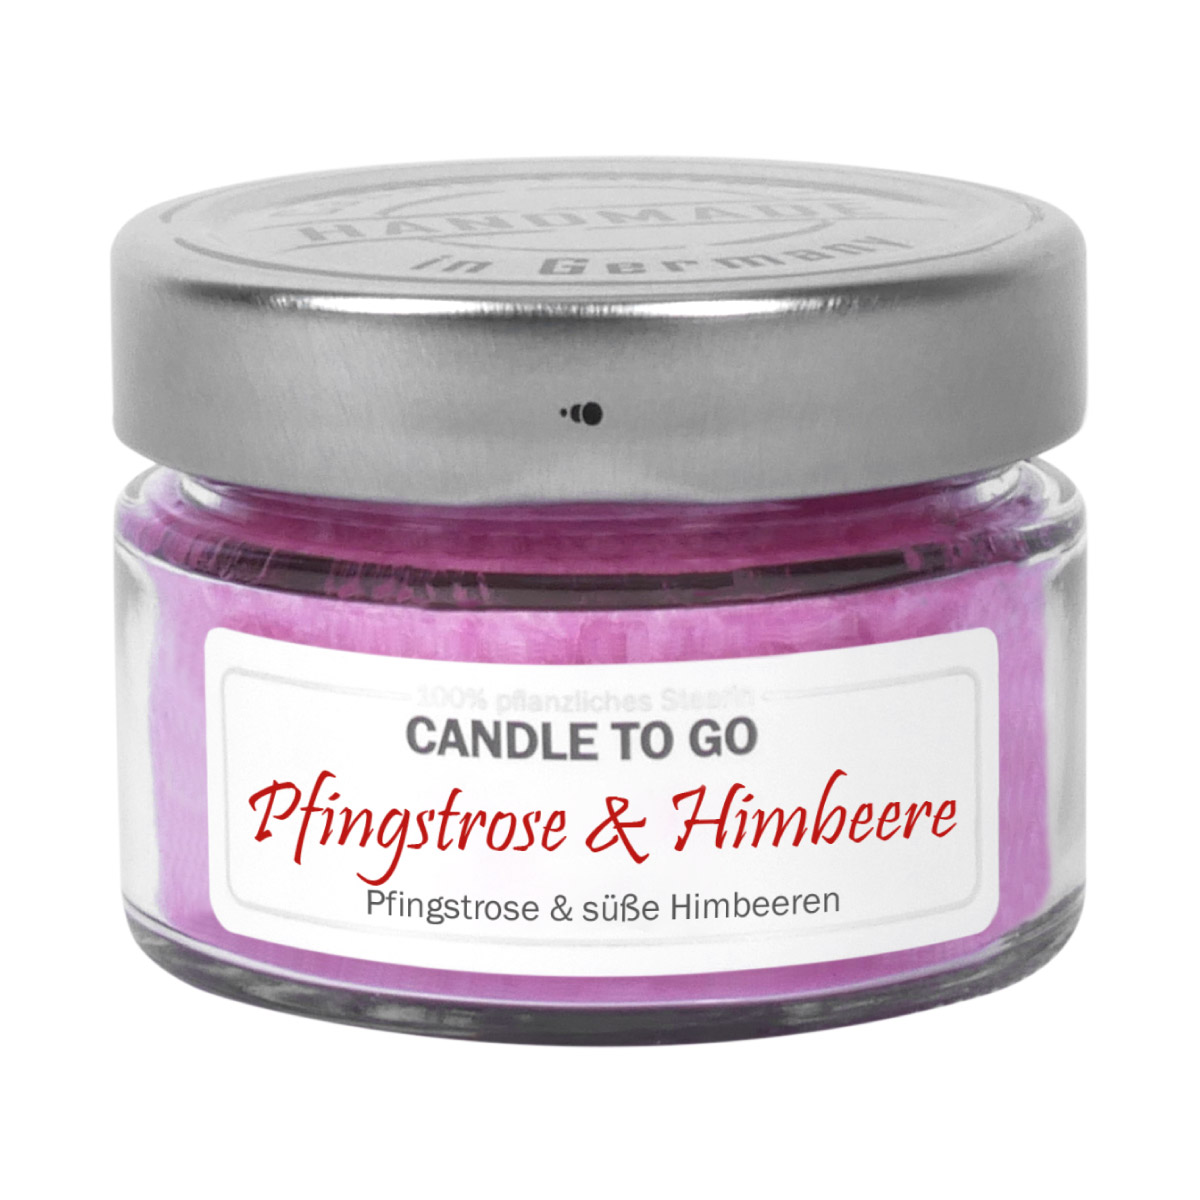 Pfingstrose Himbeere - Candle to Go Duftkerze von Candle Factory